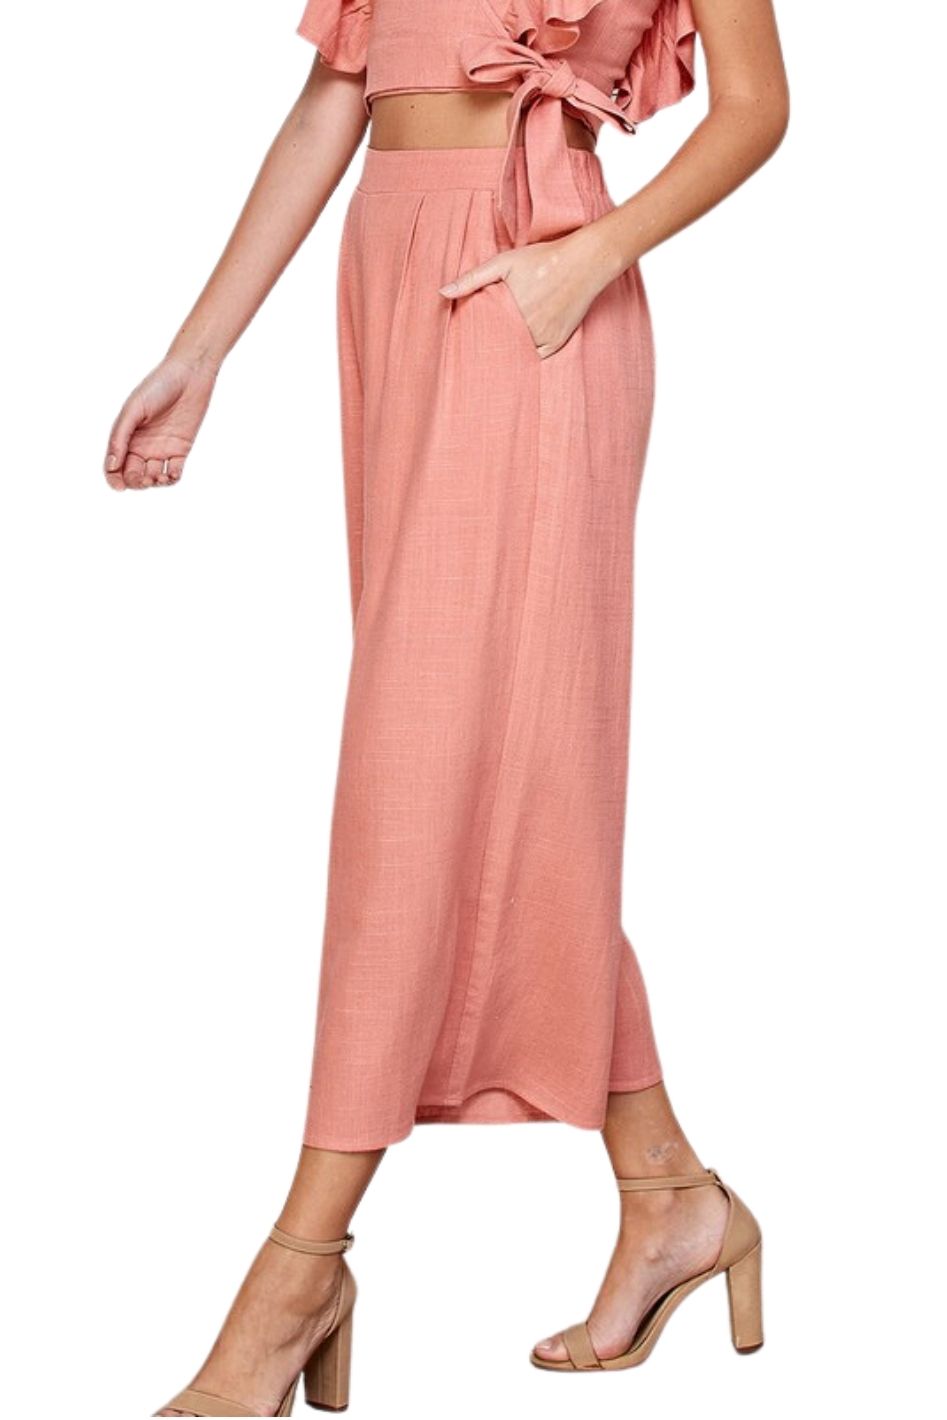 Coral Breeze Fit and Flare Linen Pants - Expressive Collective CO.